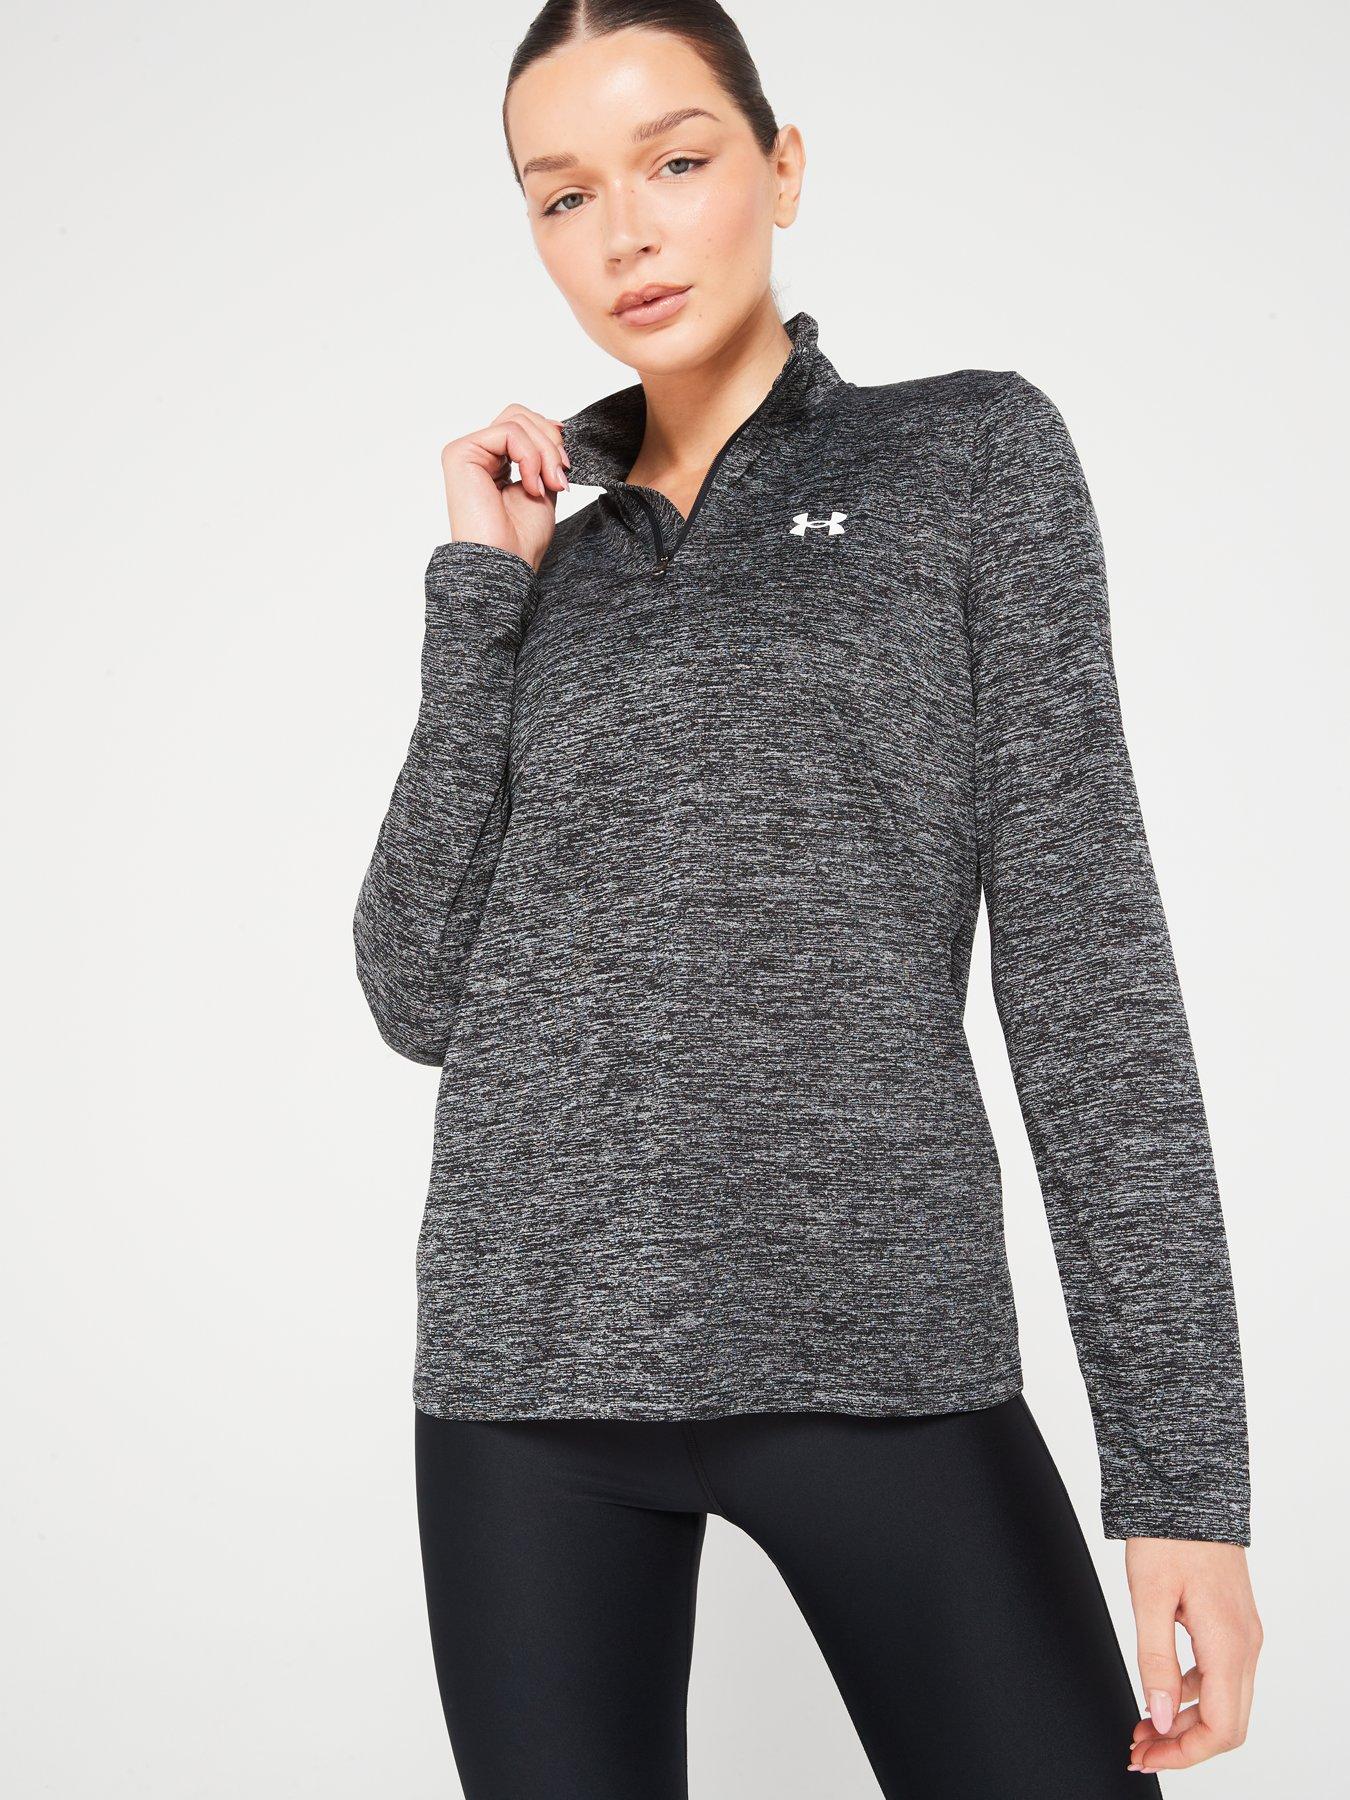  Under Armour Women's Authentics Long Sleeves Crew Neck T-Shirt,  Black (001)/White, X-Small : Clothing, Shoes & Jewelry